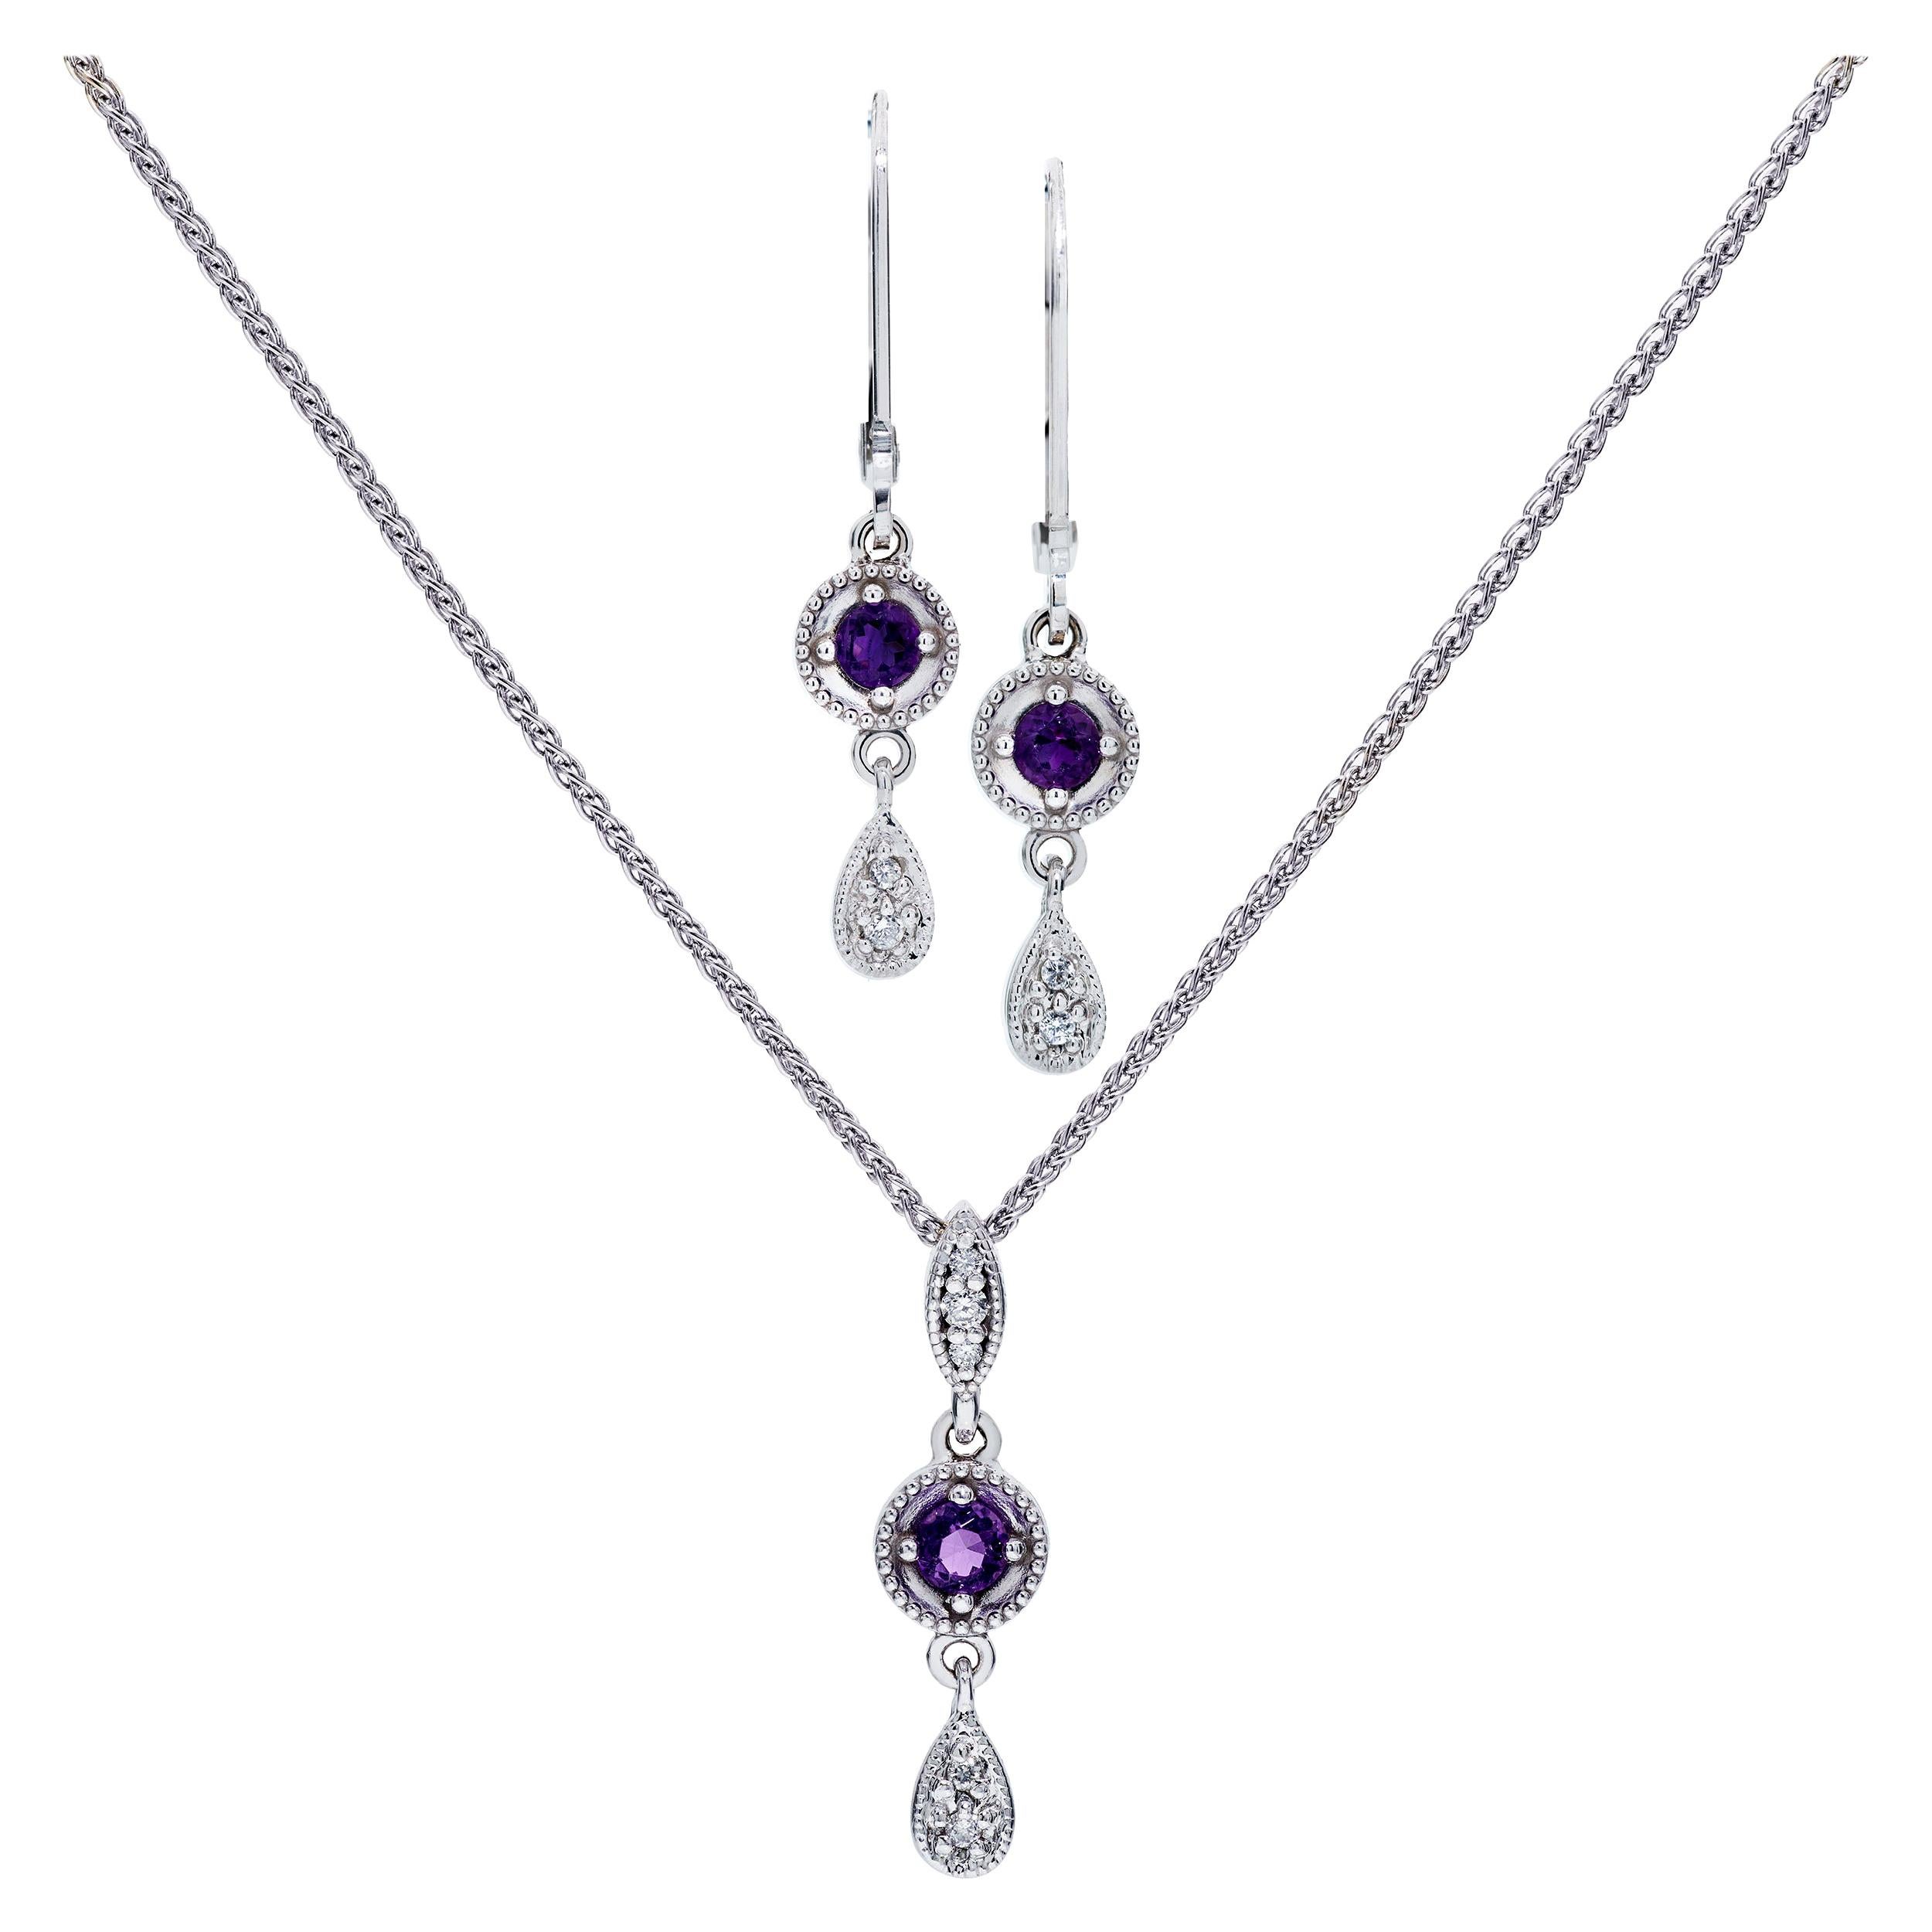 Amethyst and Diamond Necklace and Earring Set in 14 Karat White Gold